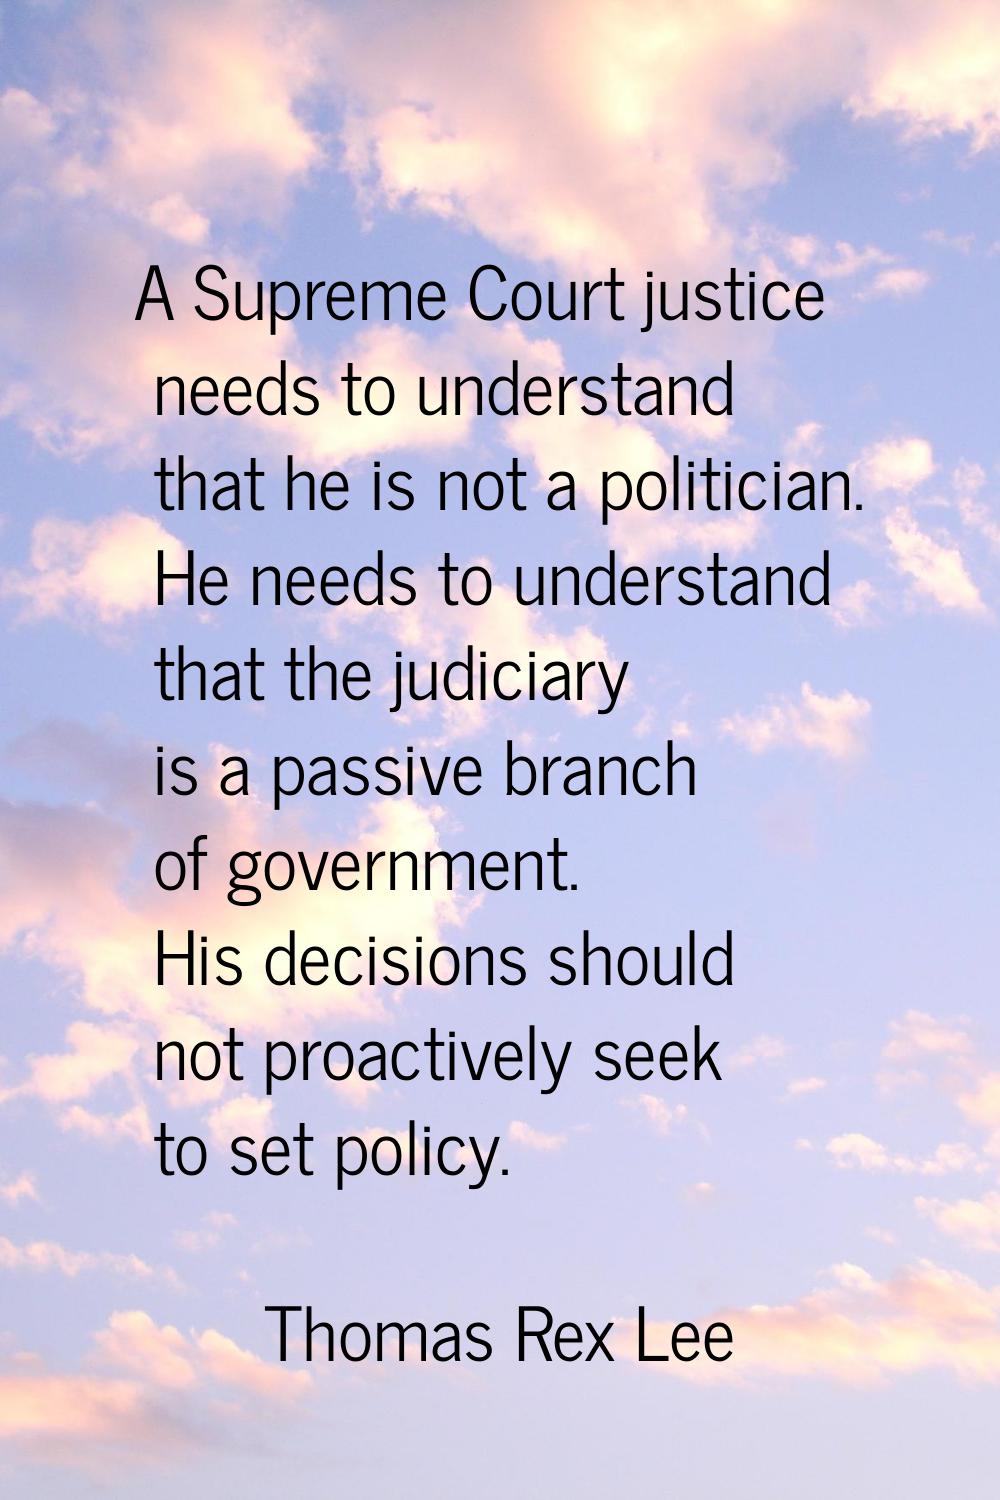 A Supreme Court justice needs to understand that he is not a politician. He needs to understand tha